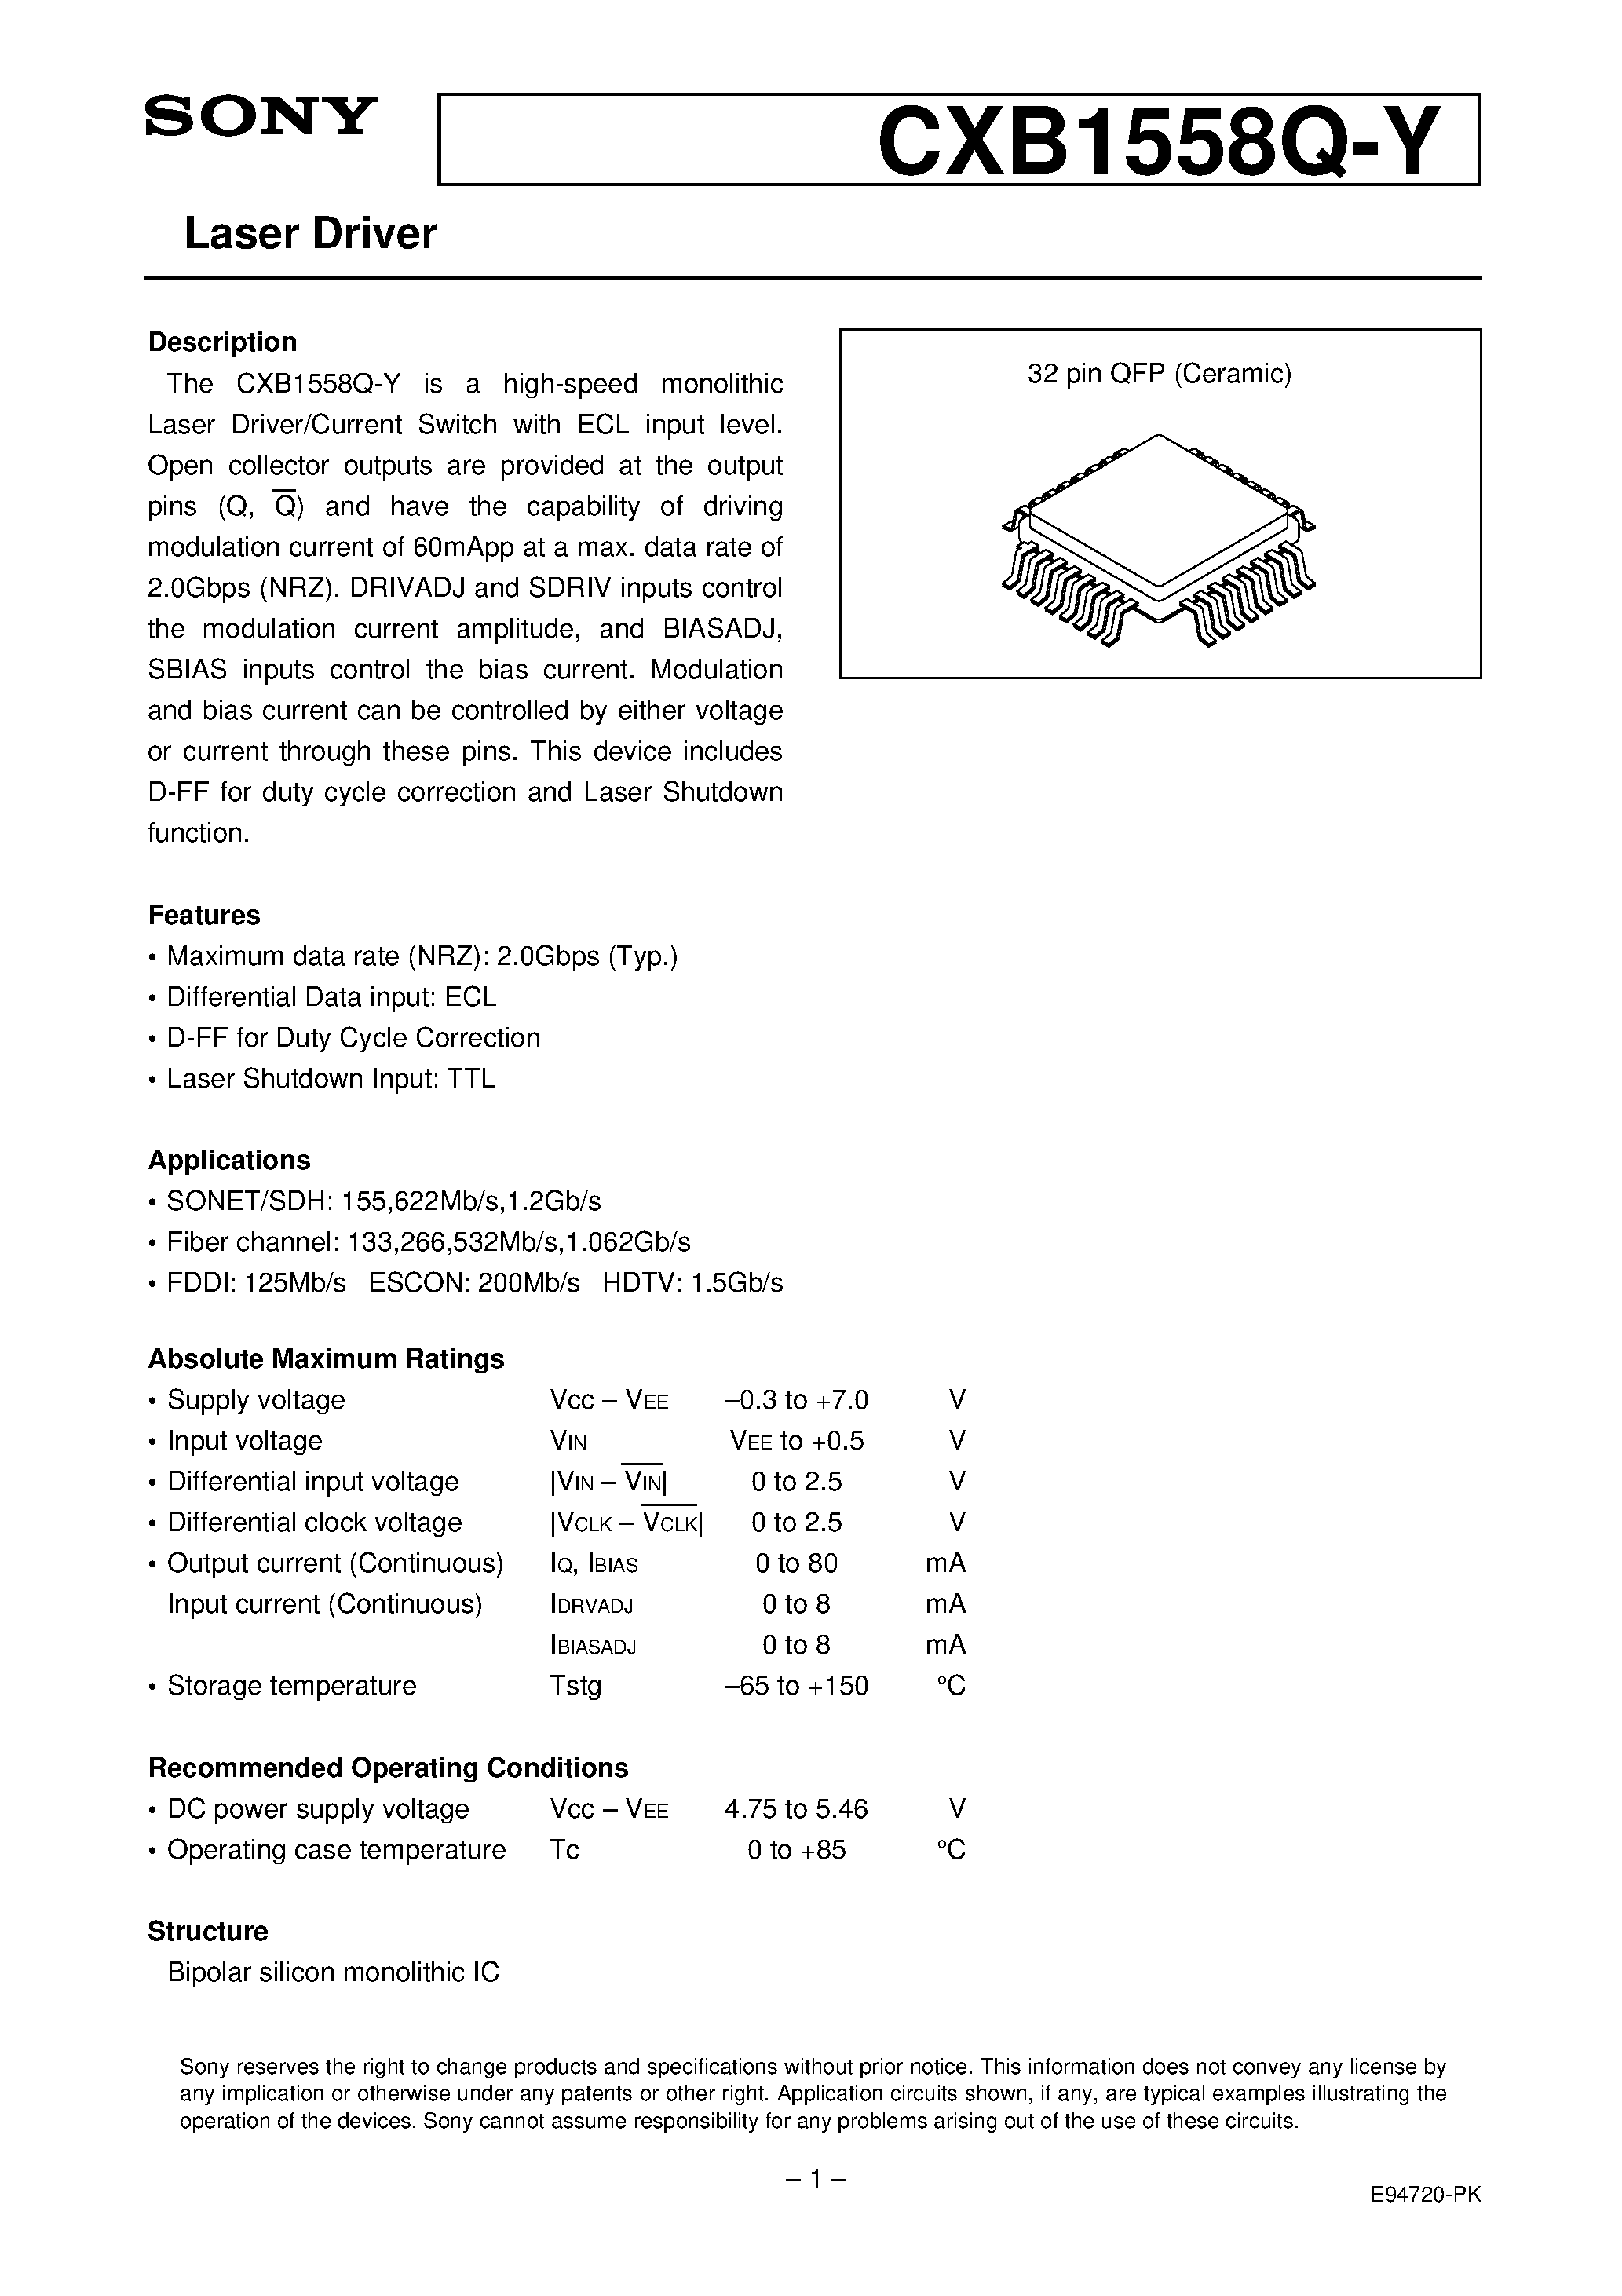 Datasheet CXB1558Q-Y - Laser Driver page 1